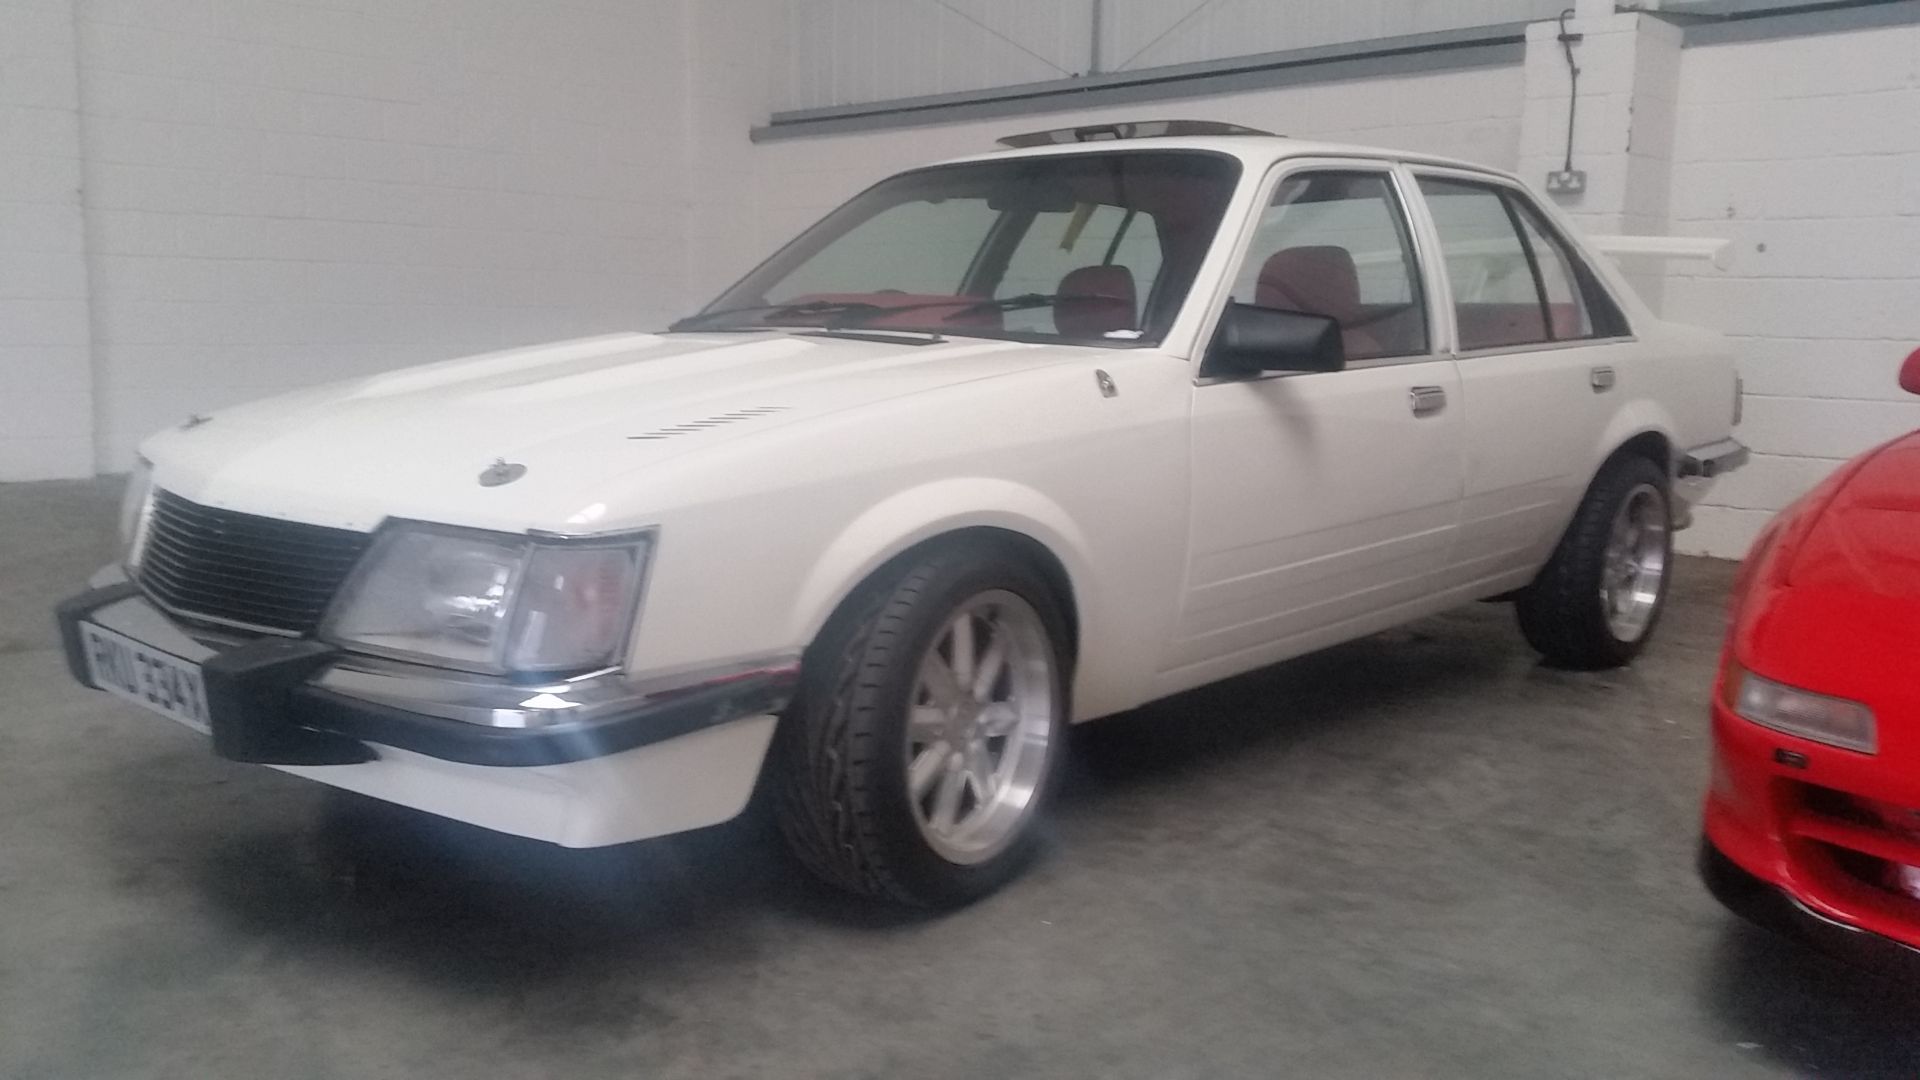 1982 Holden Commodore - Image 2 of 34